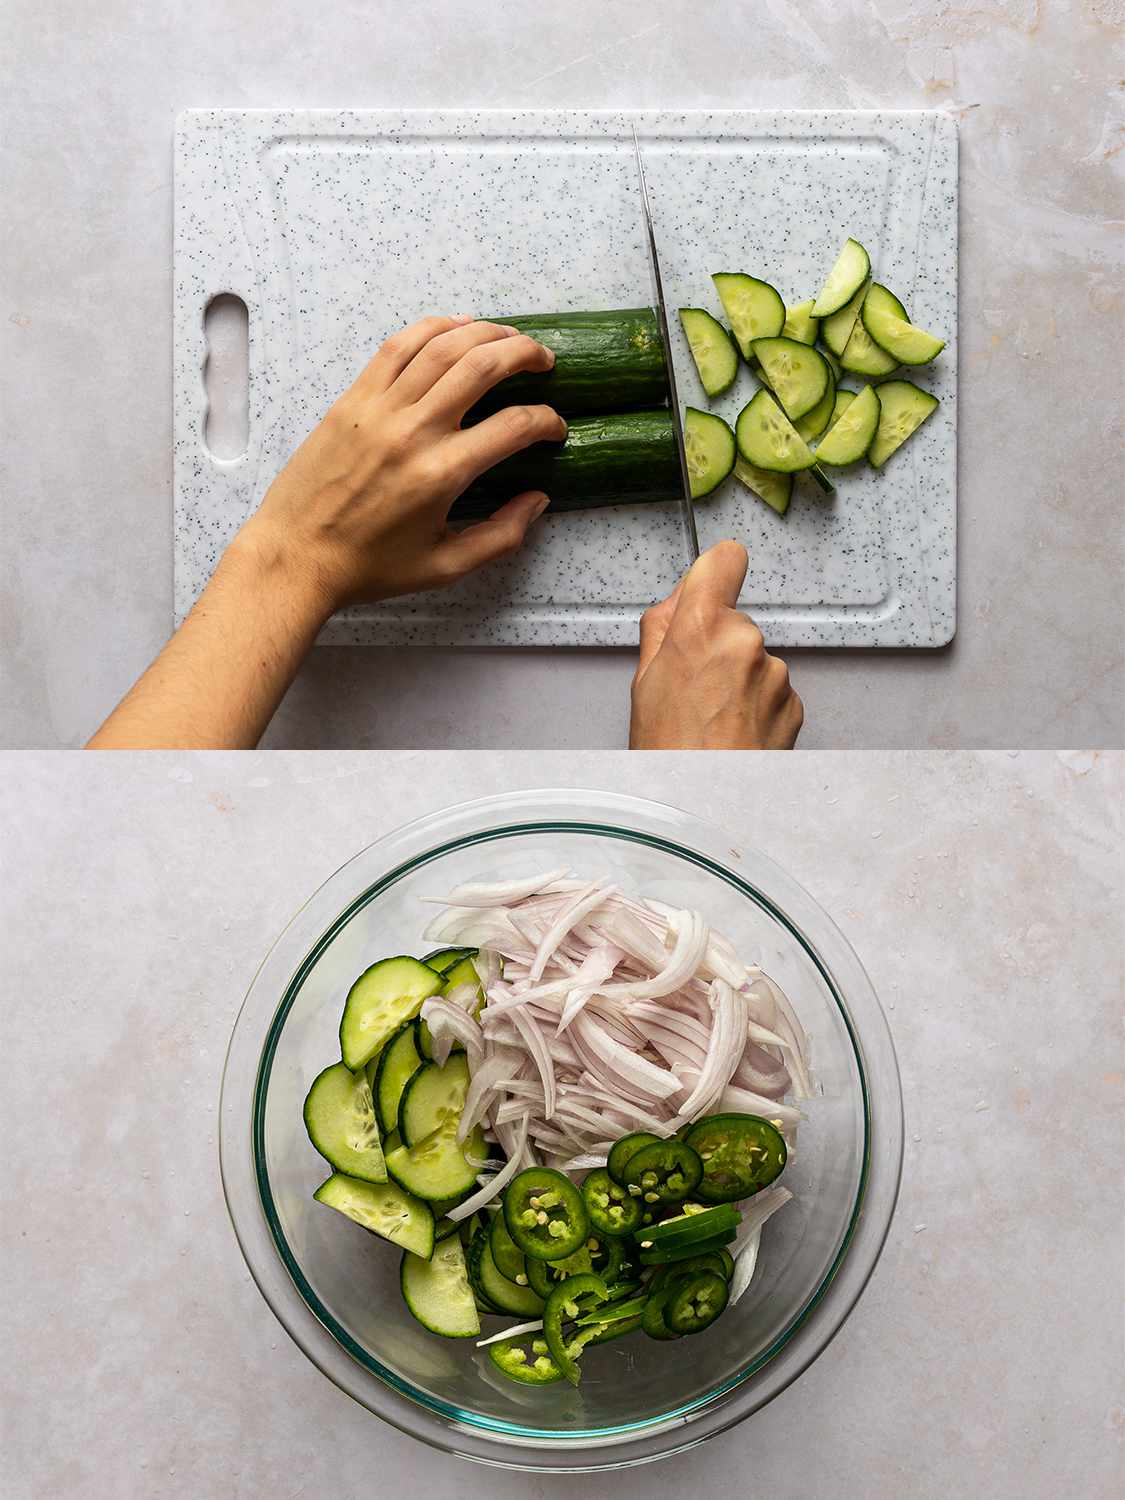 A vertical two-image collage. The top image shows a cucumber, split in half lengthwise with both halves placed horizontally, side-by-side, on a plastic cutting board. A hand holding a knife is cutting the cucumber into half-moon slices. The bottom image shows a glass mixing bowl holding the sliced cucumber as well as sliced shallots and sliced jalapeÃ±os.